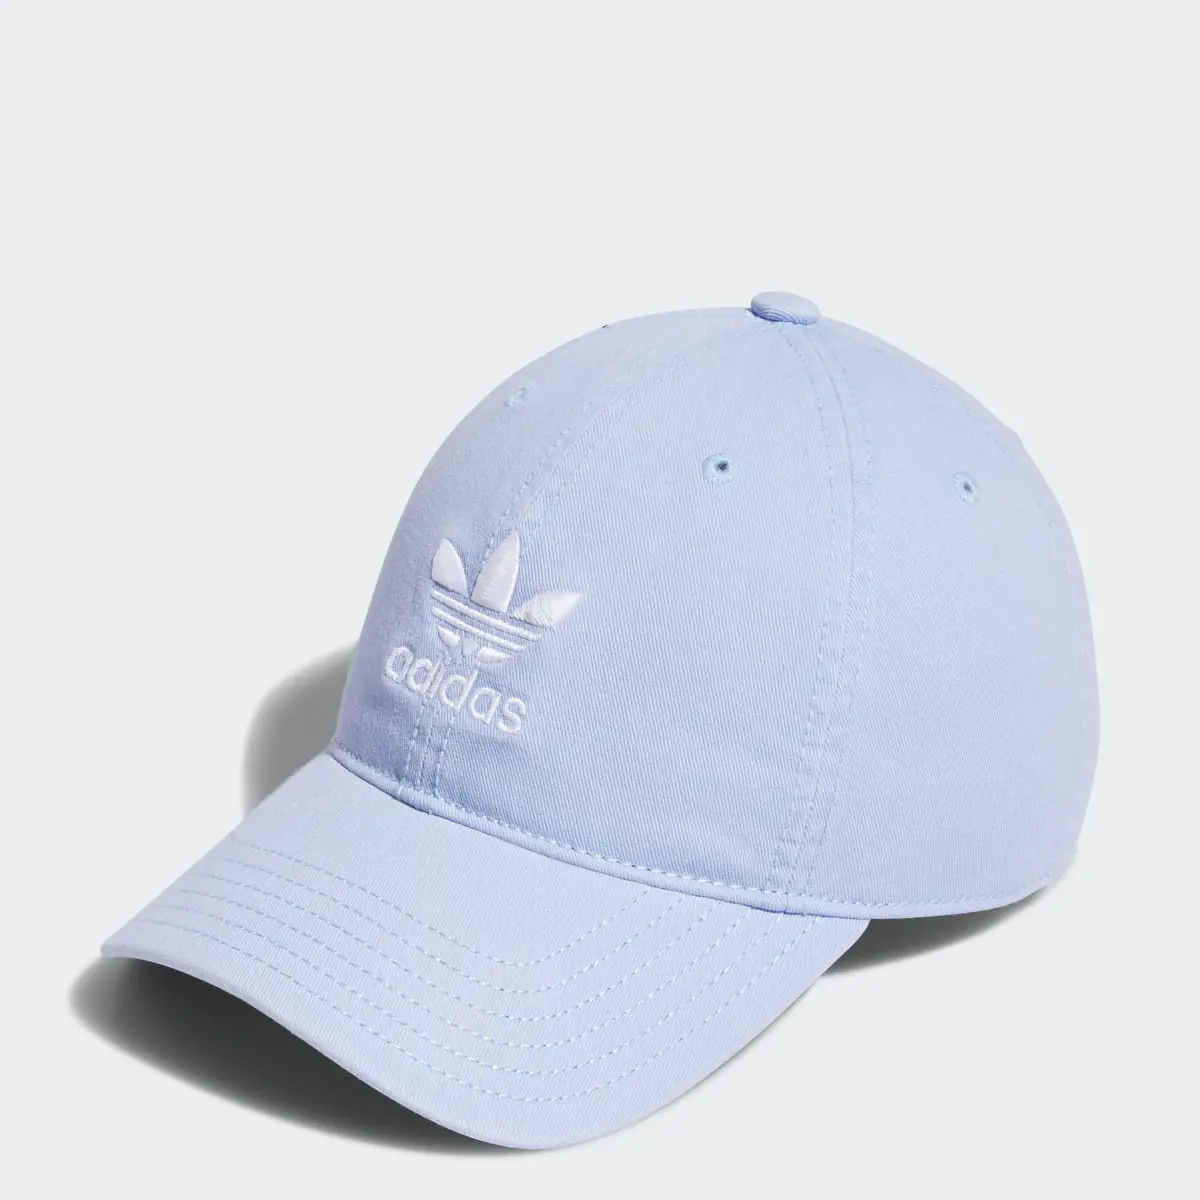 Adidas Relaxed Strap Back Hat. 1